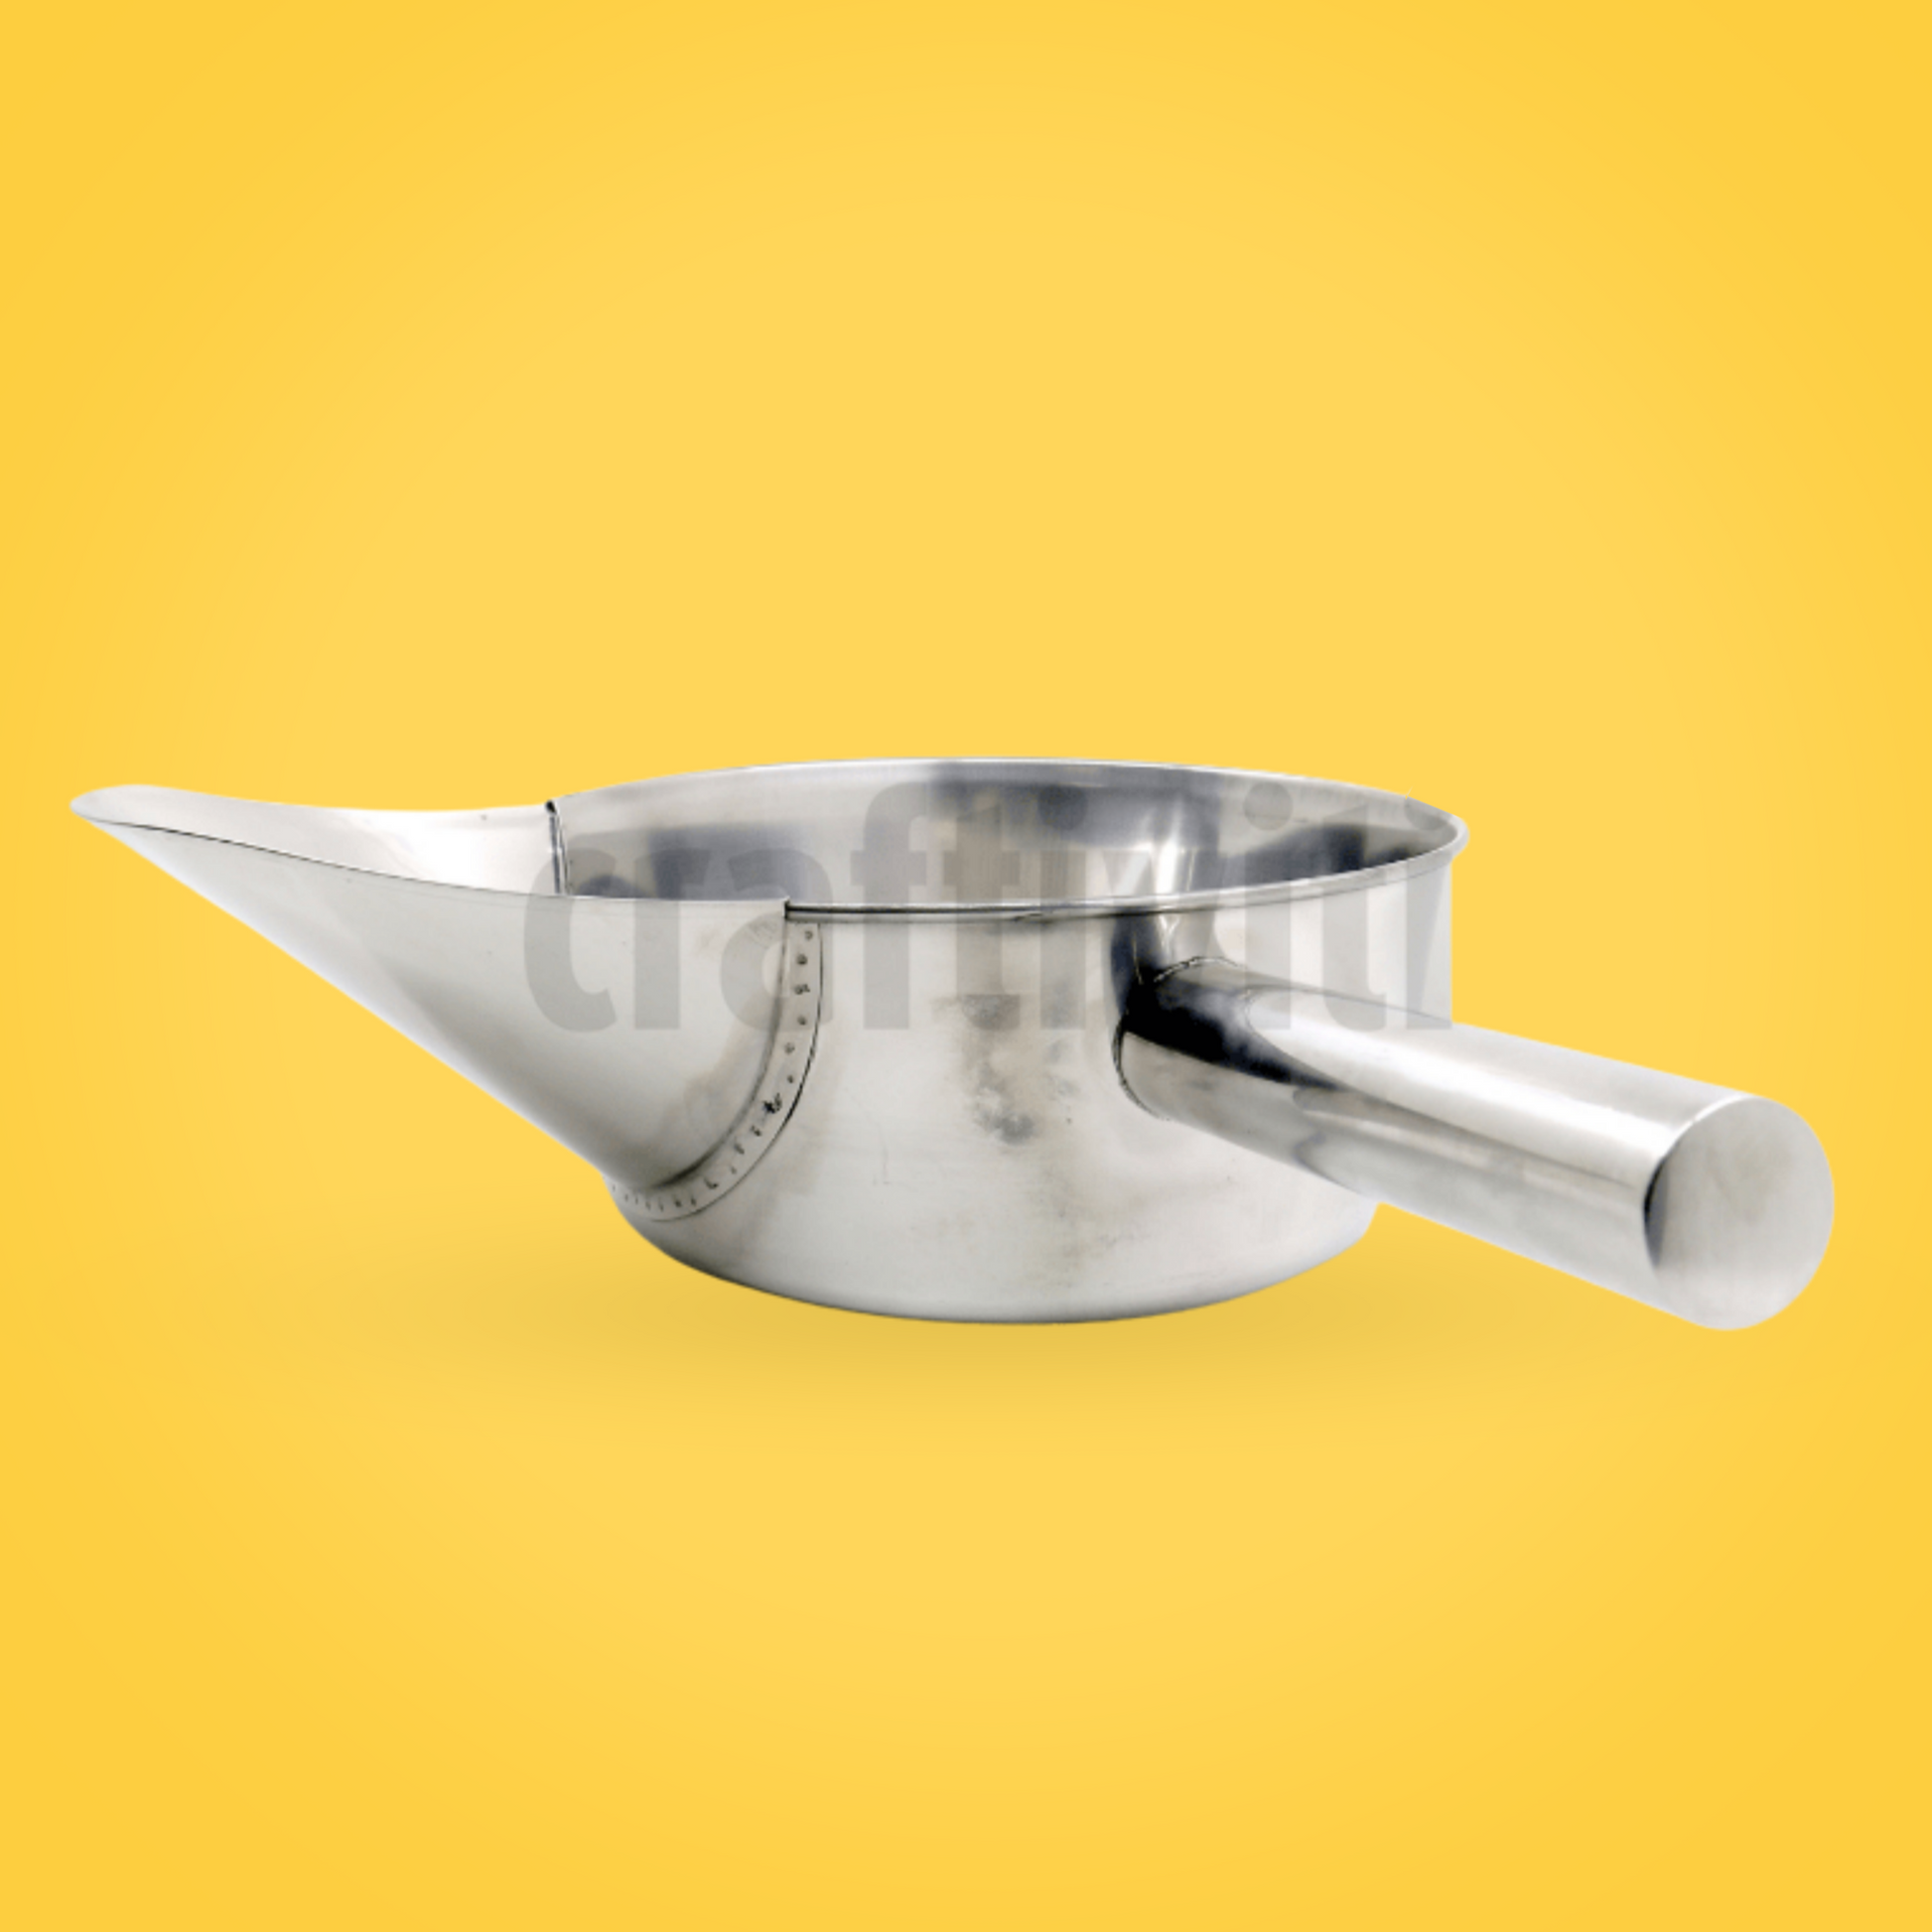 Stainless Steel Wax Pot with Pouring Spout - 19.9cm Diameter